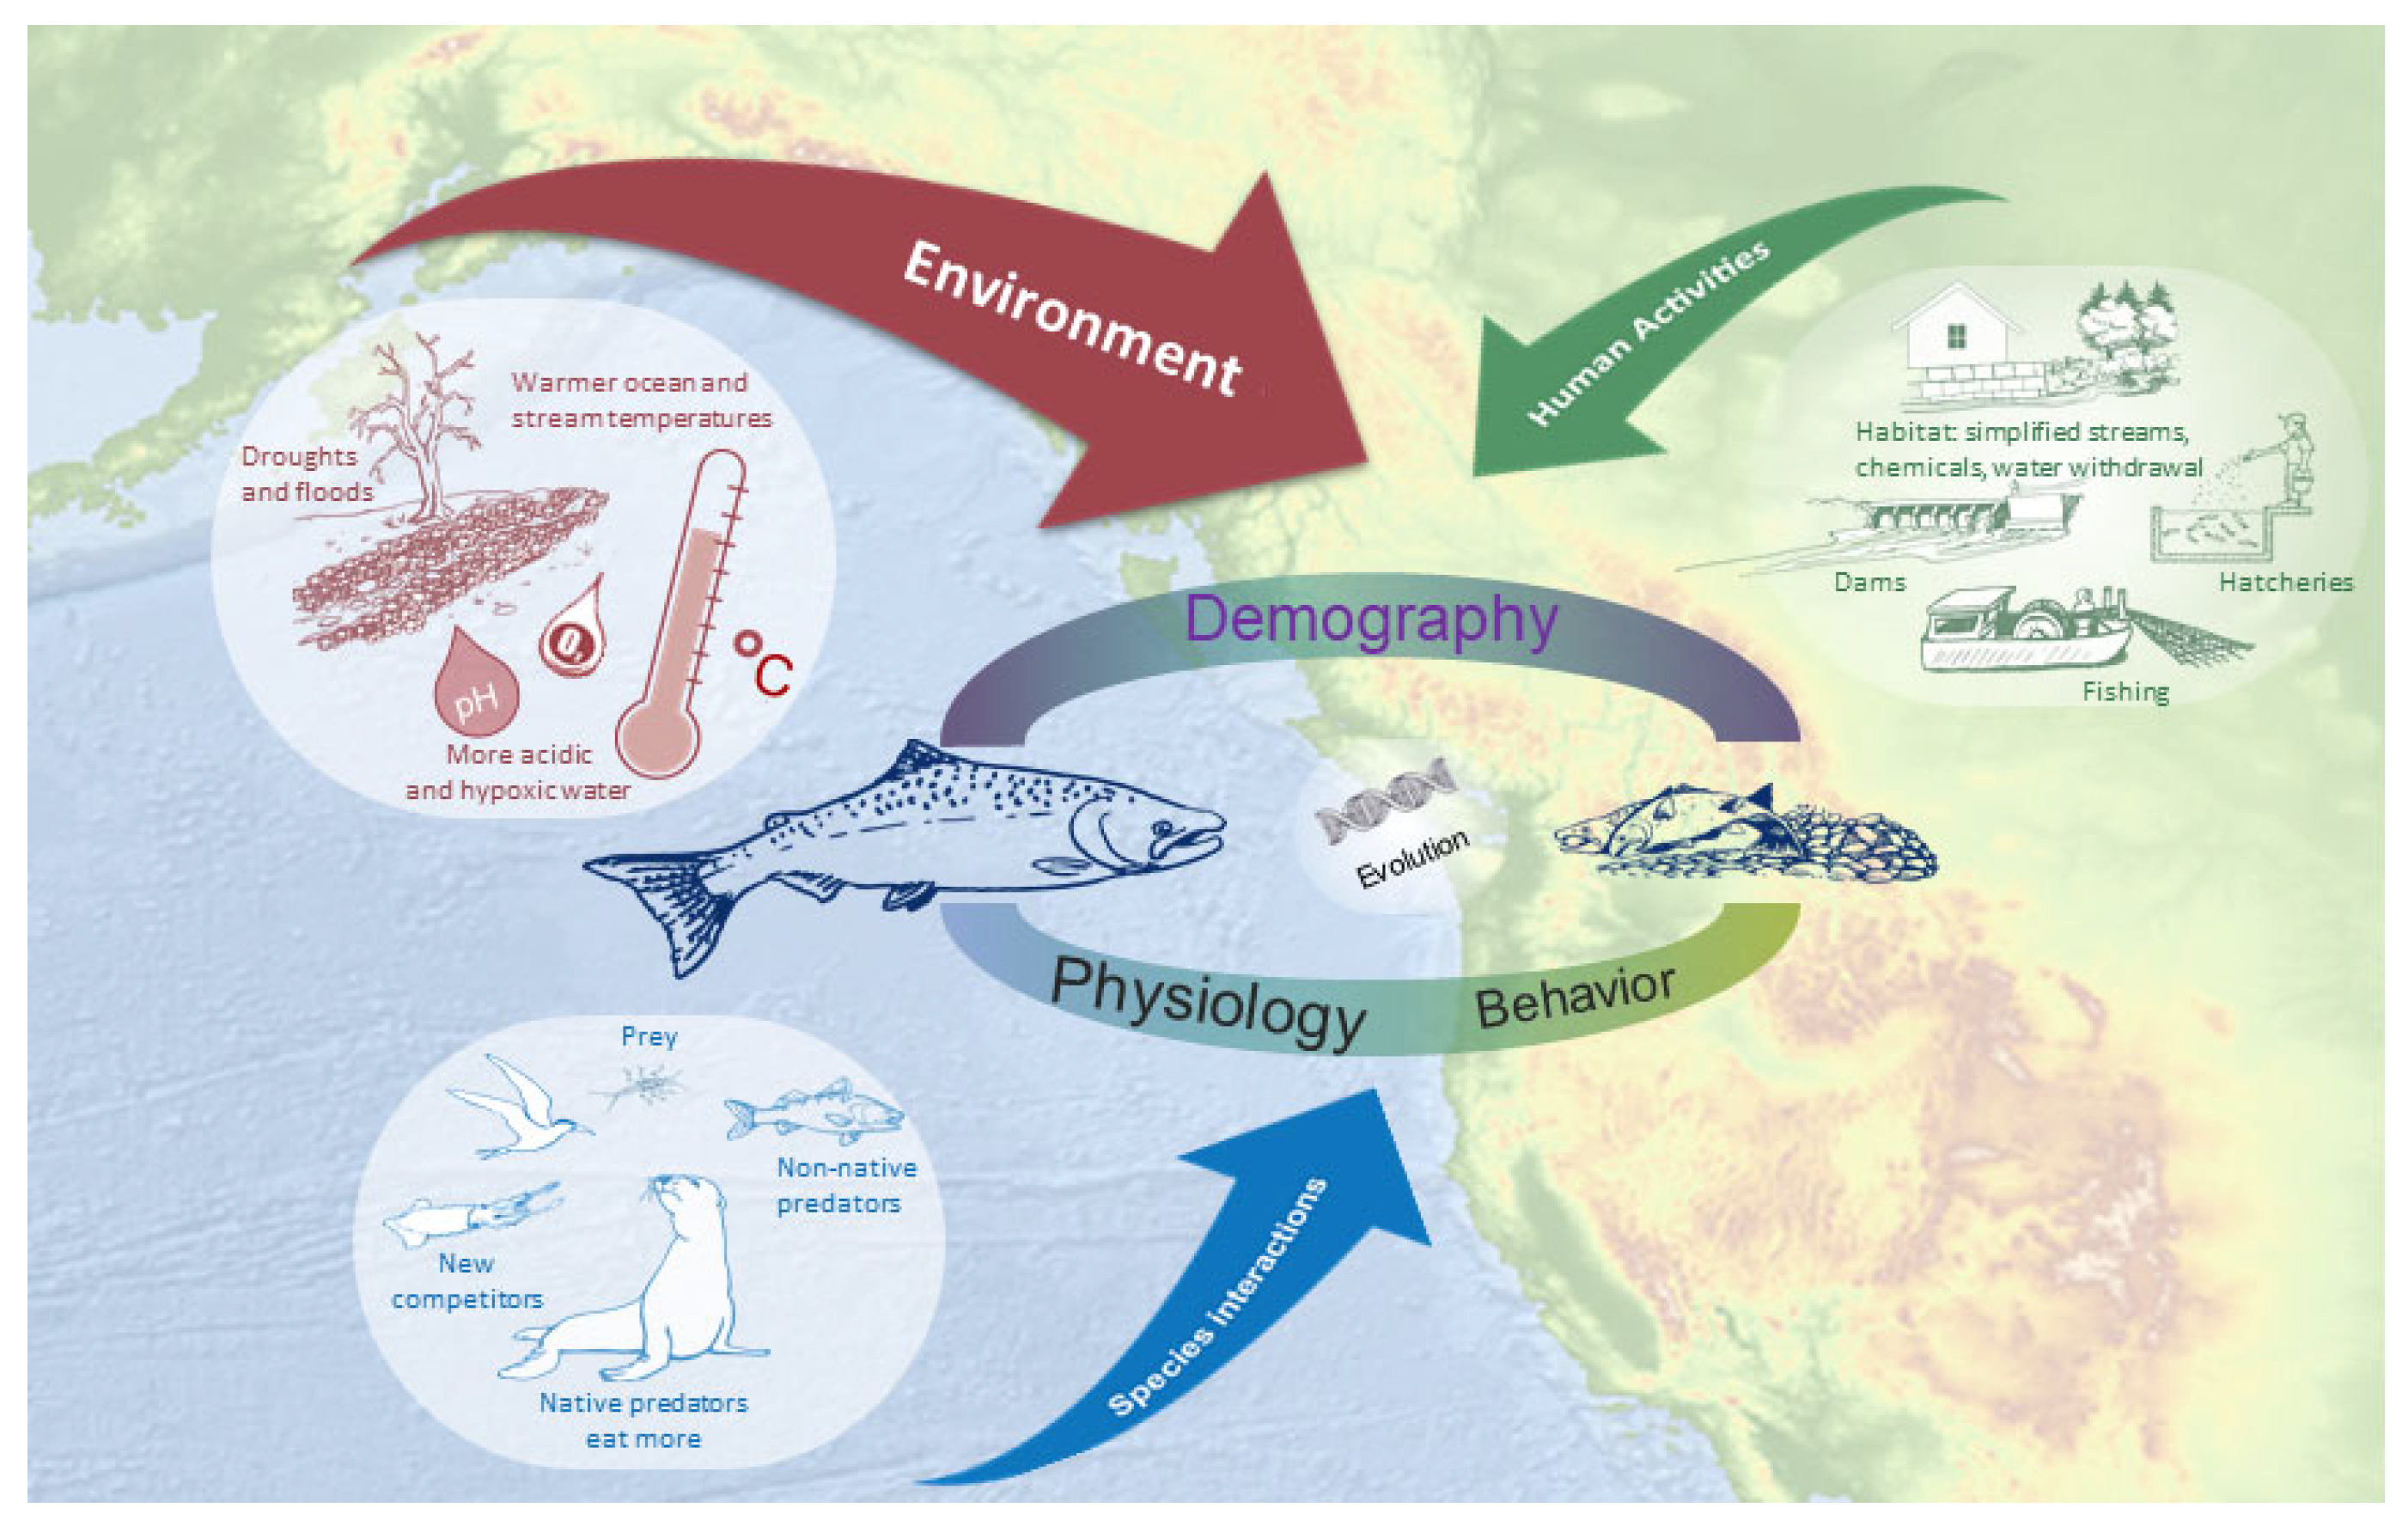 Tracing the evolutionary origins of fish to shallow ocean waters